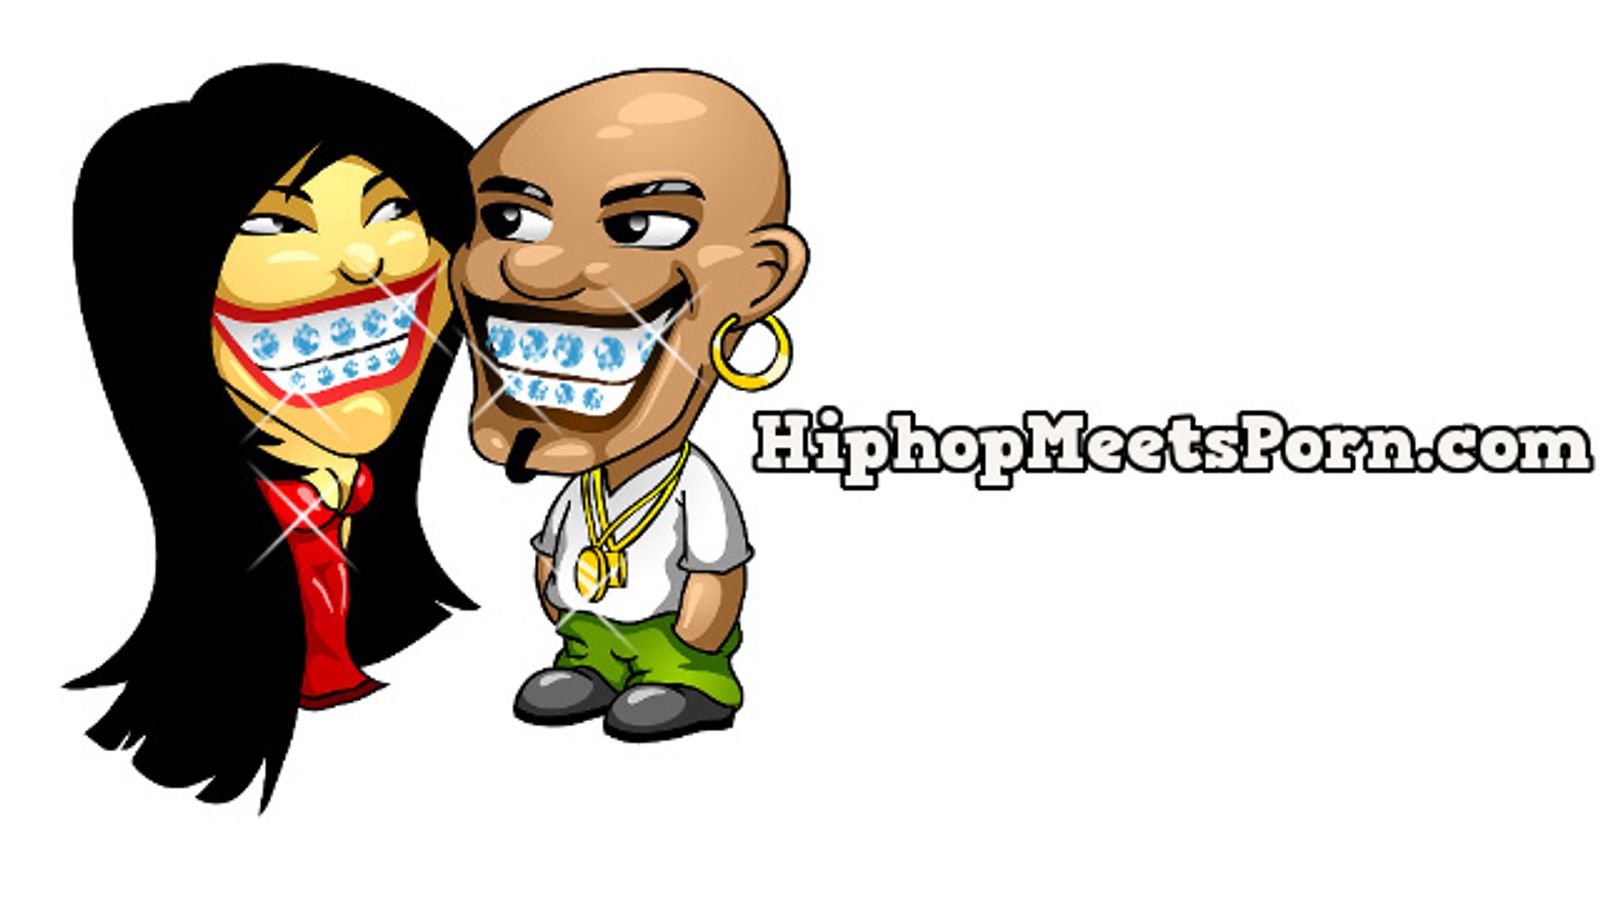 HiphopMeetsPorn.com Re-Launches After 7 Year Break